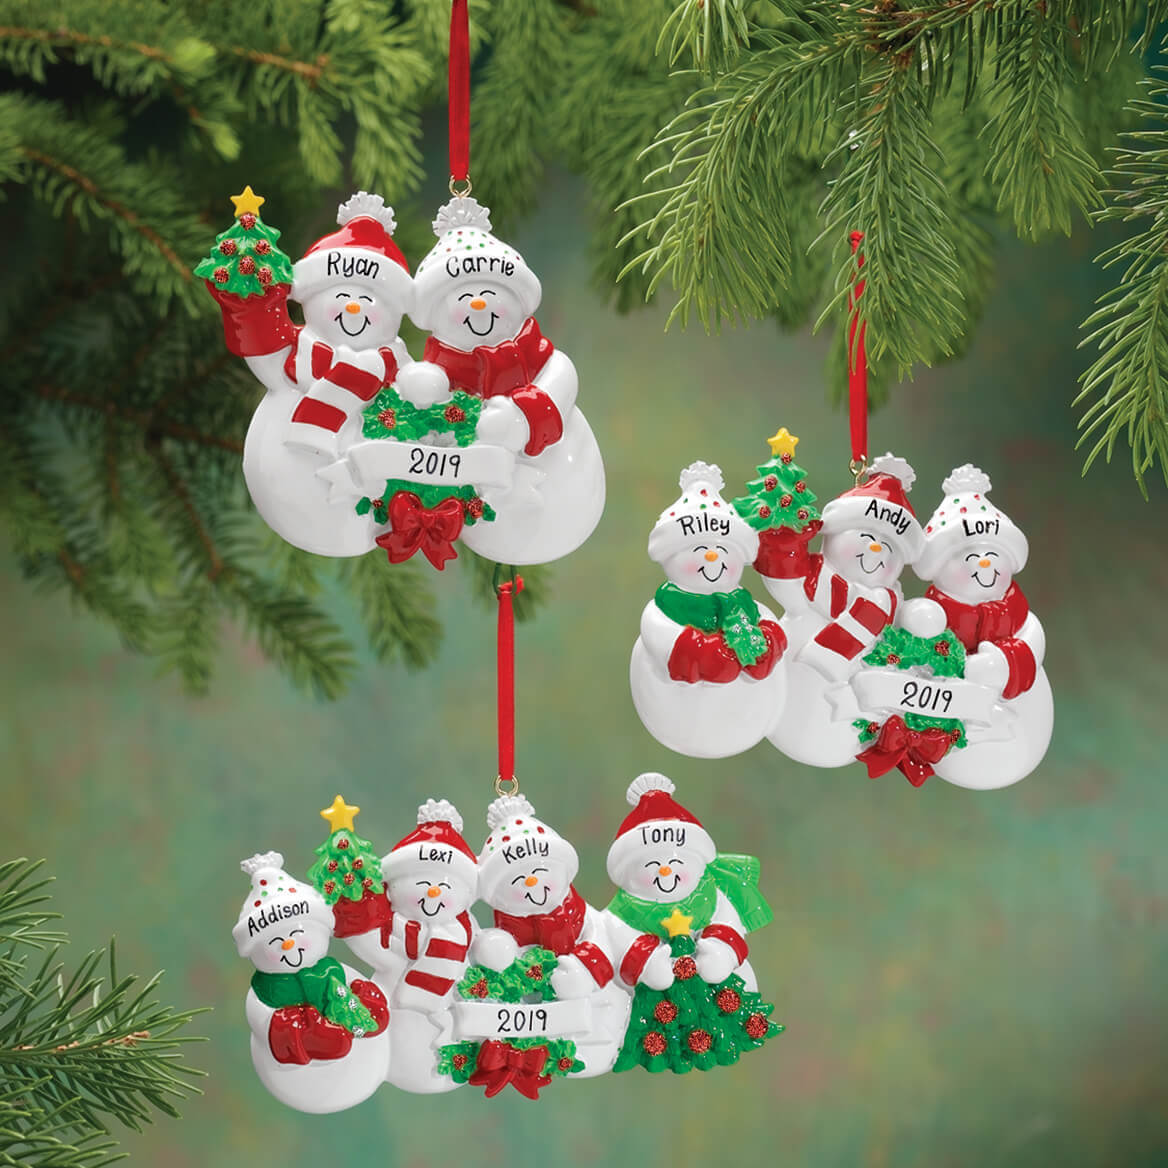 2 angels fat elf 4 Vintage style hand made Christmas ornaments and princess...